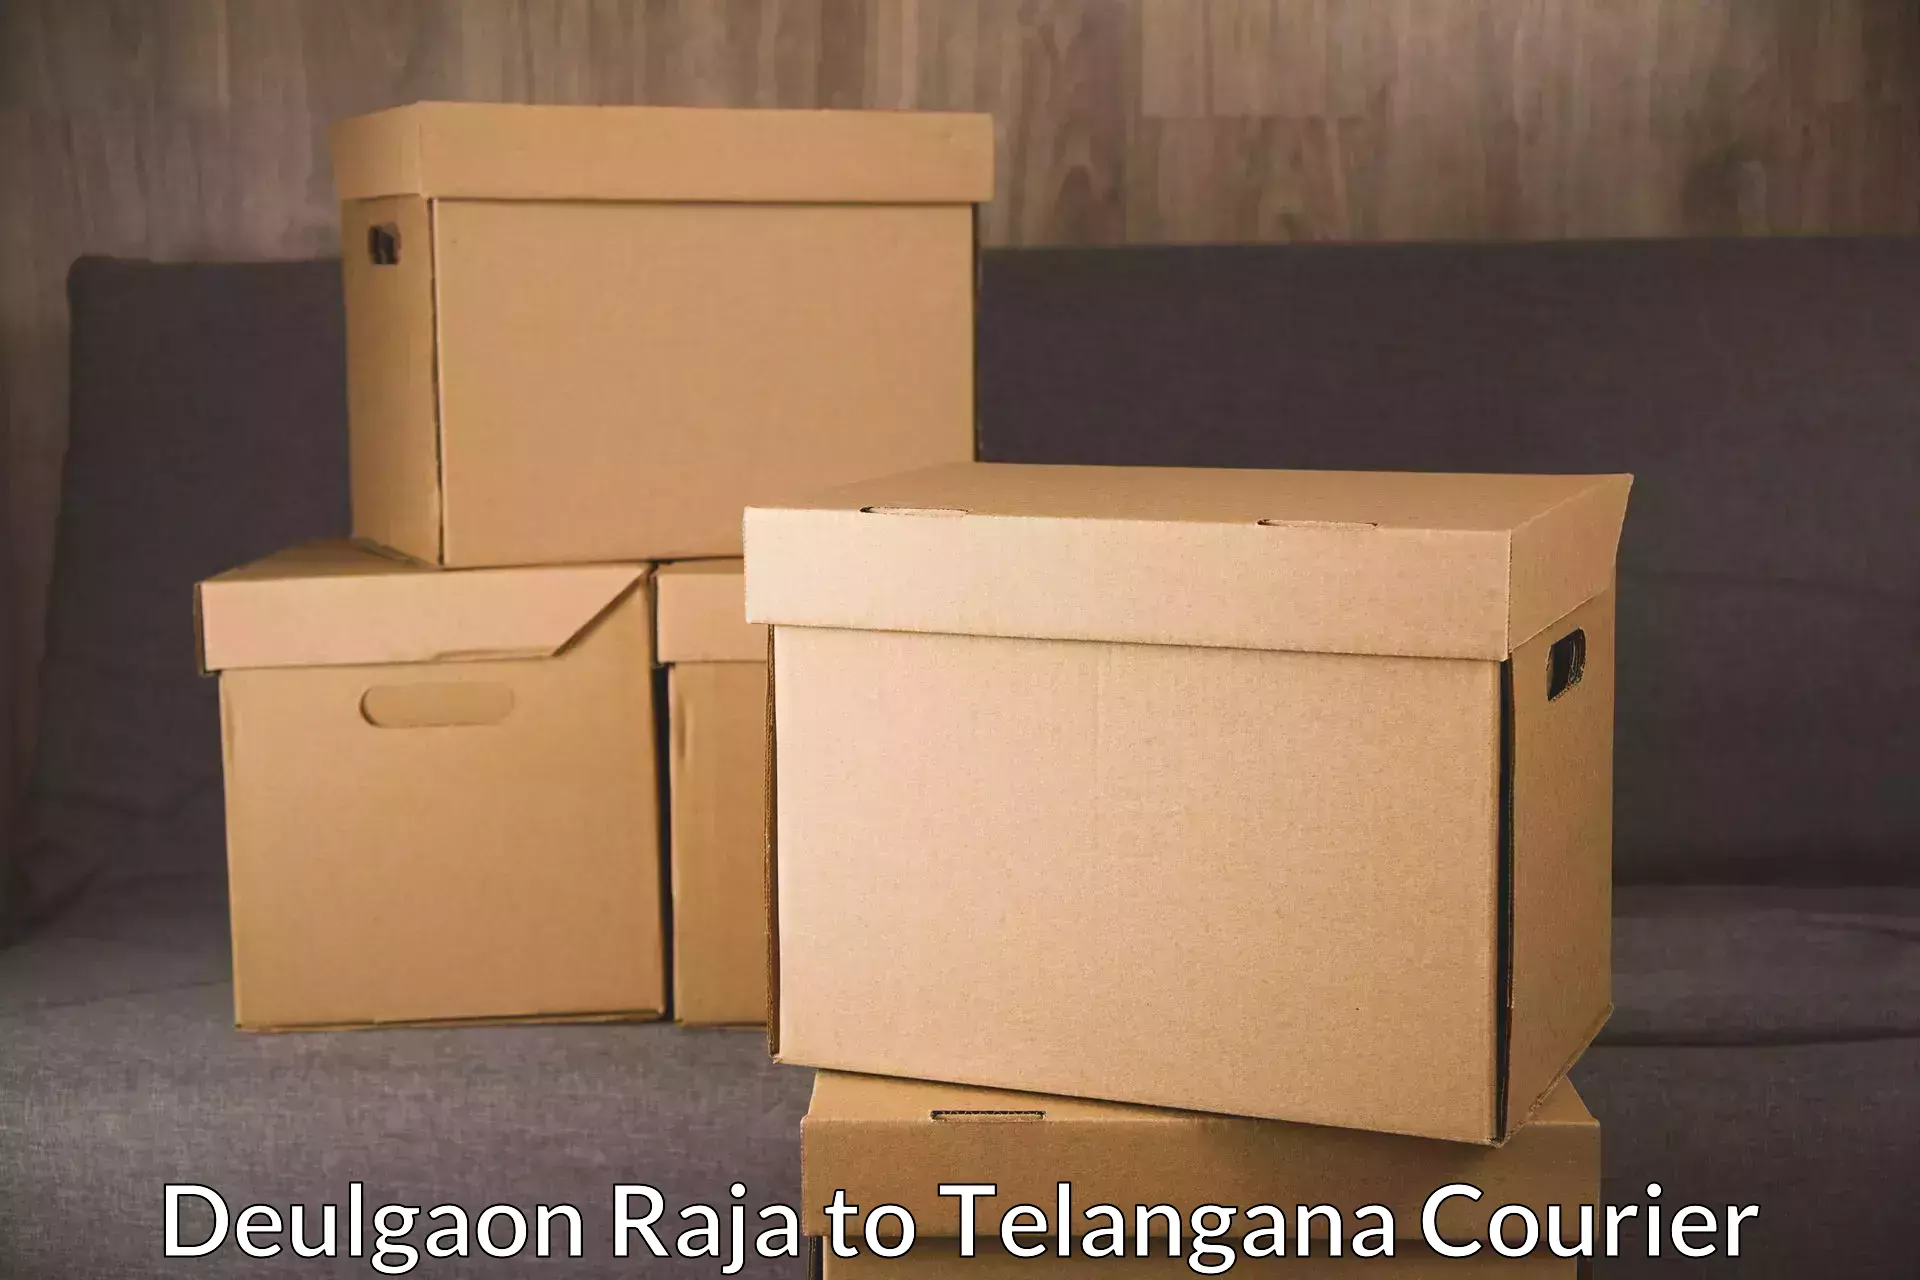 End-to-end delivery Deulgaon Raja to Pregnapur